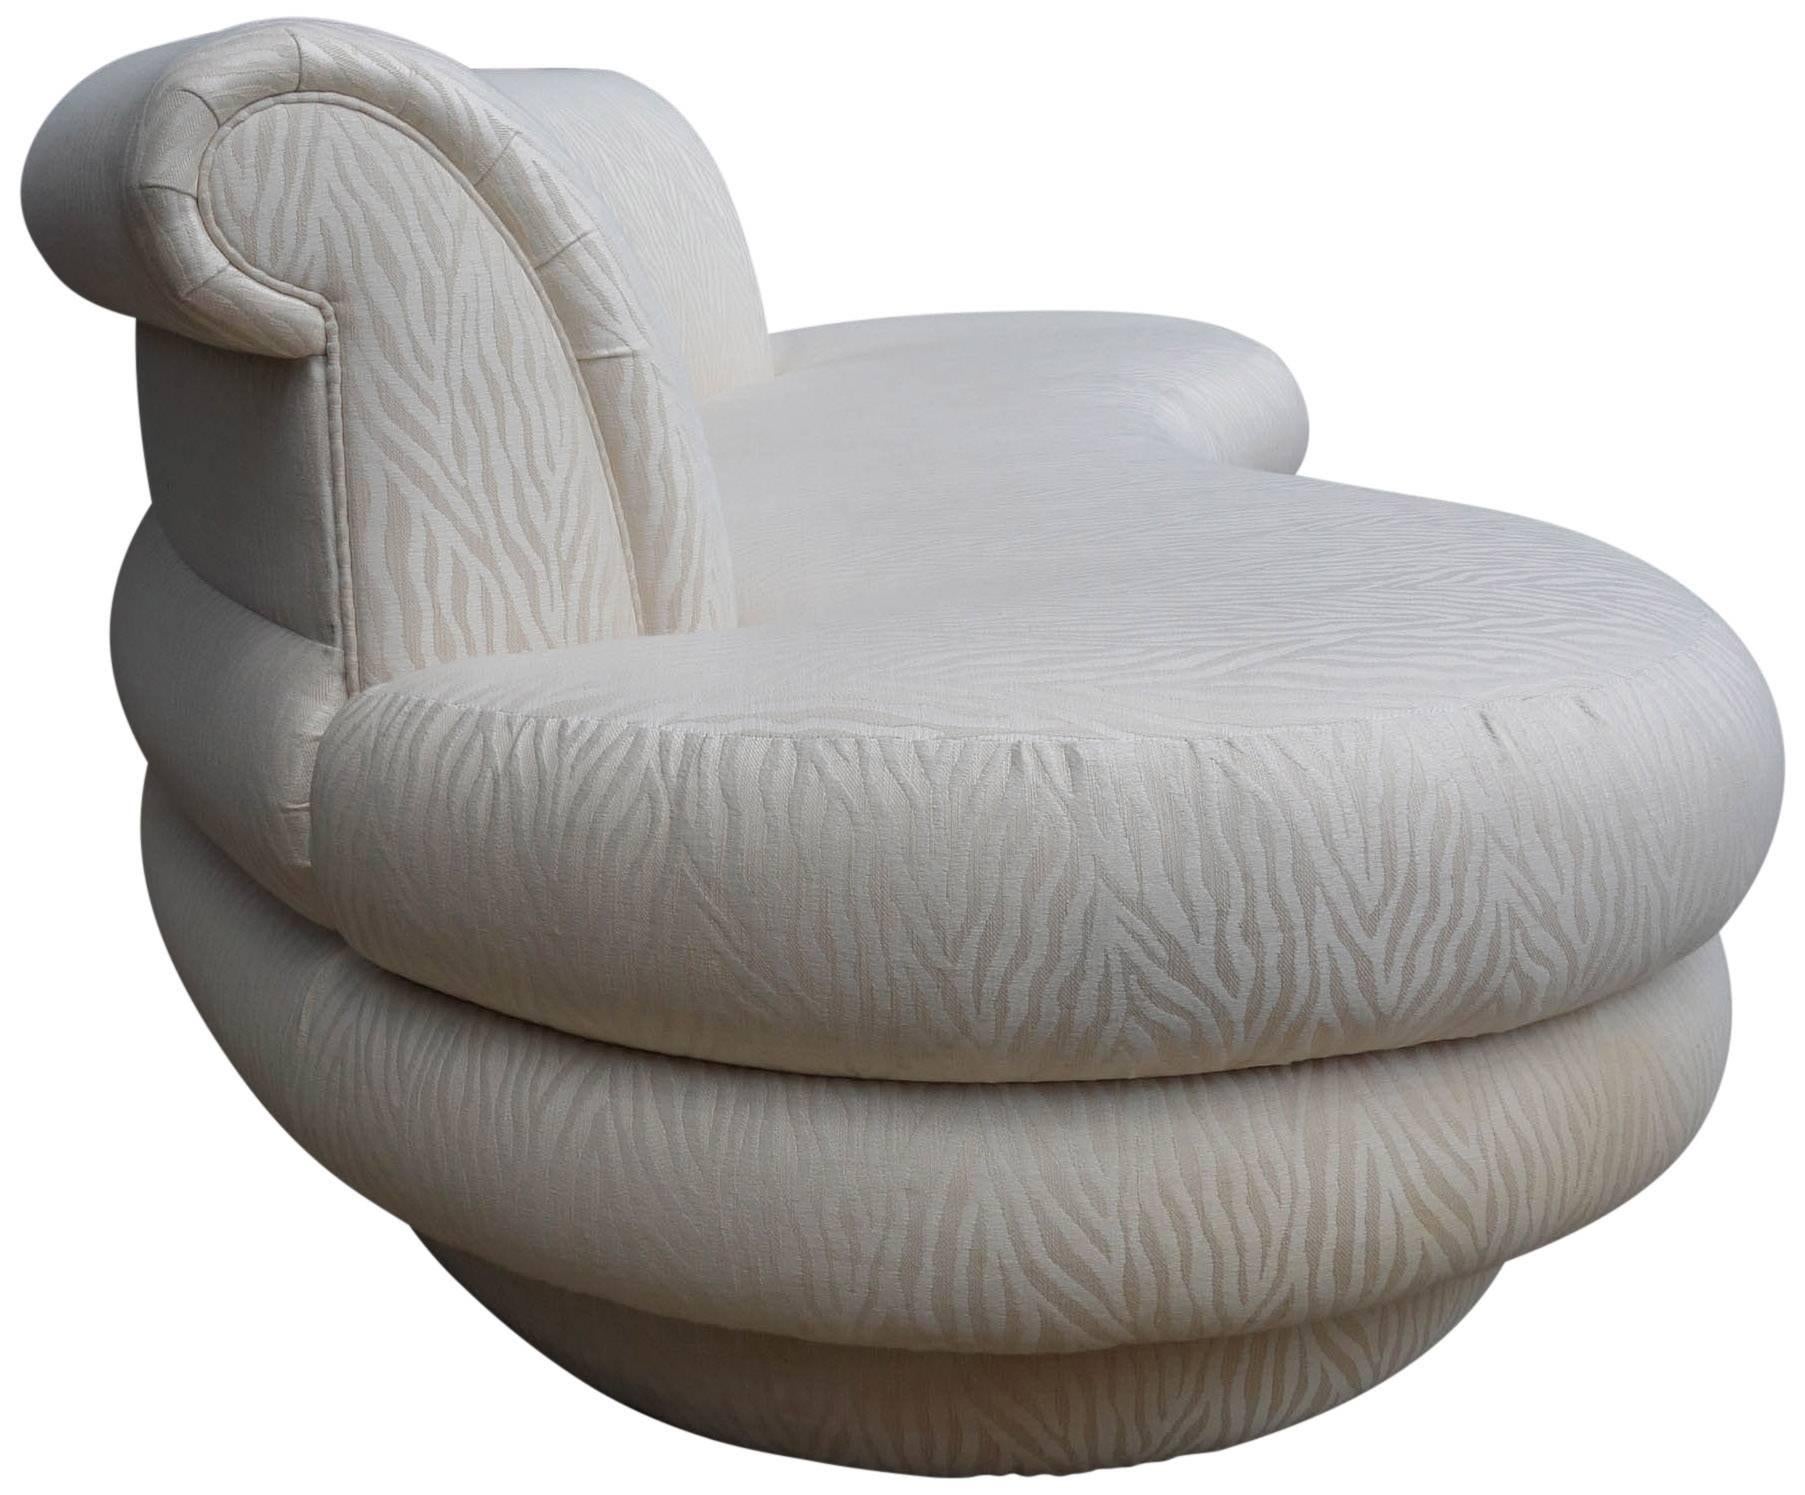 American Adrian Pearsall Kidney Shaped / Curved Sofa for Comfort Designs